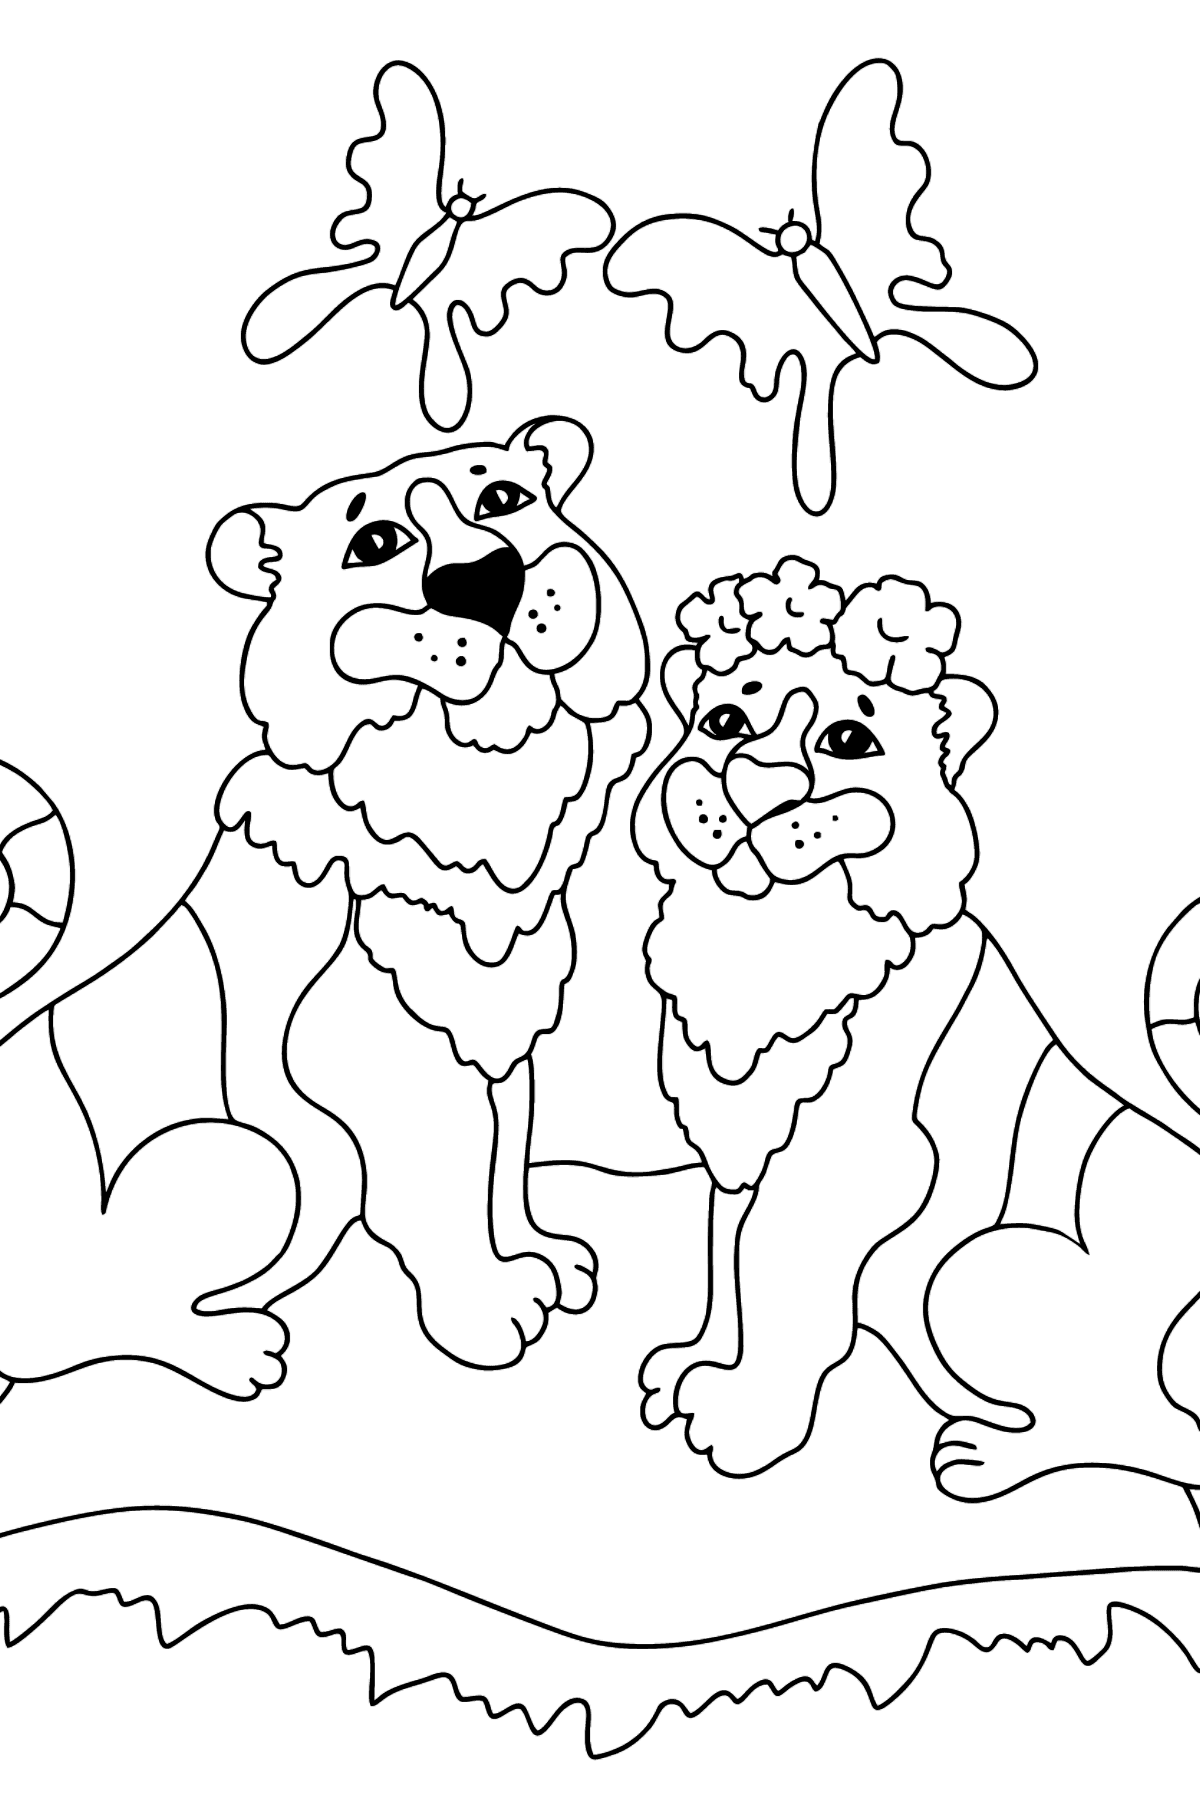 Coloring Page - Tigers on a Magic Carpet - Coloring Pages for Kids